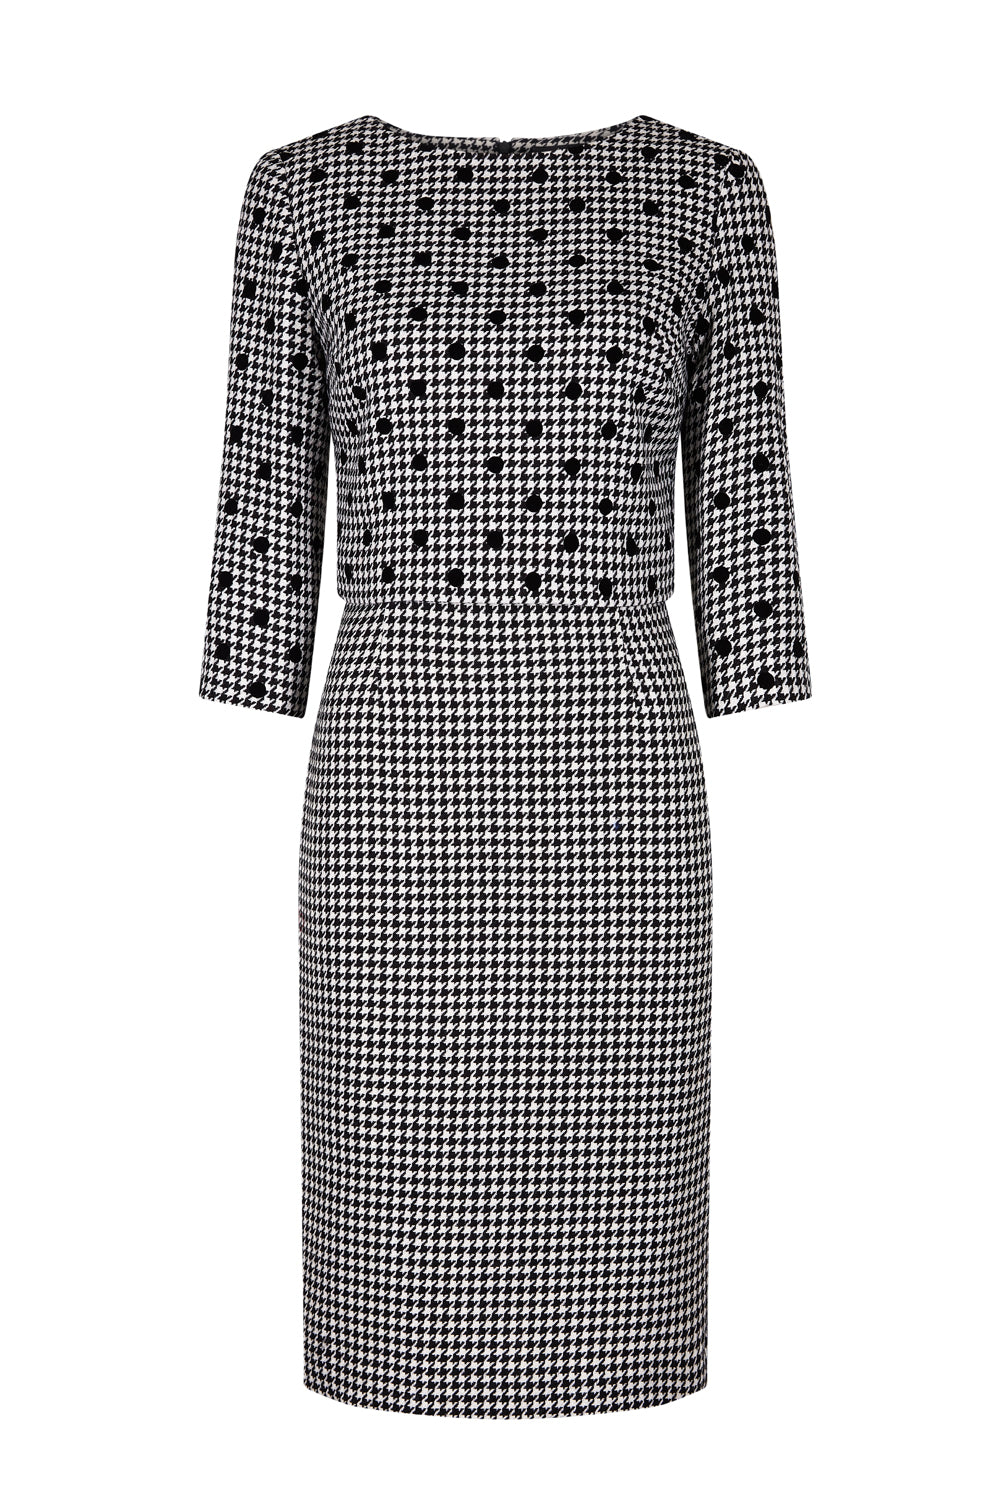 Dogtooth Check Dress with Floating Bodice - Rolanda